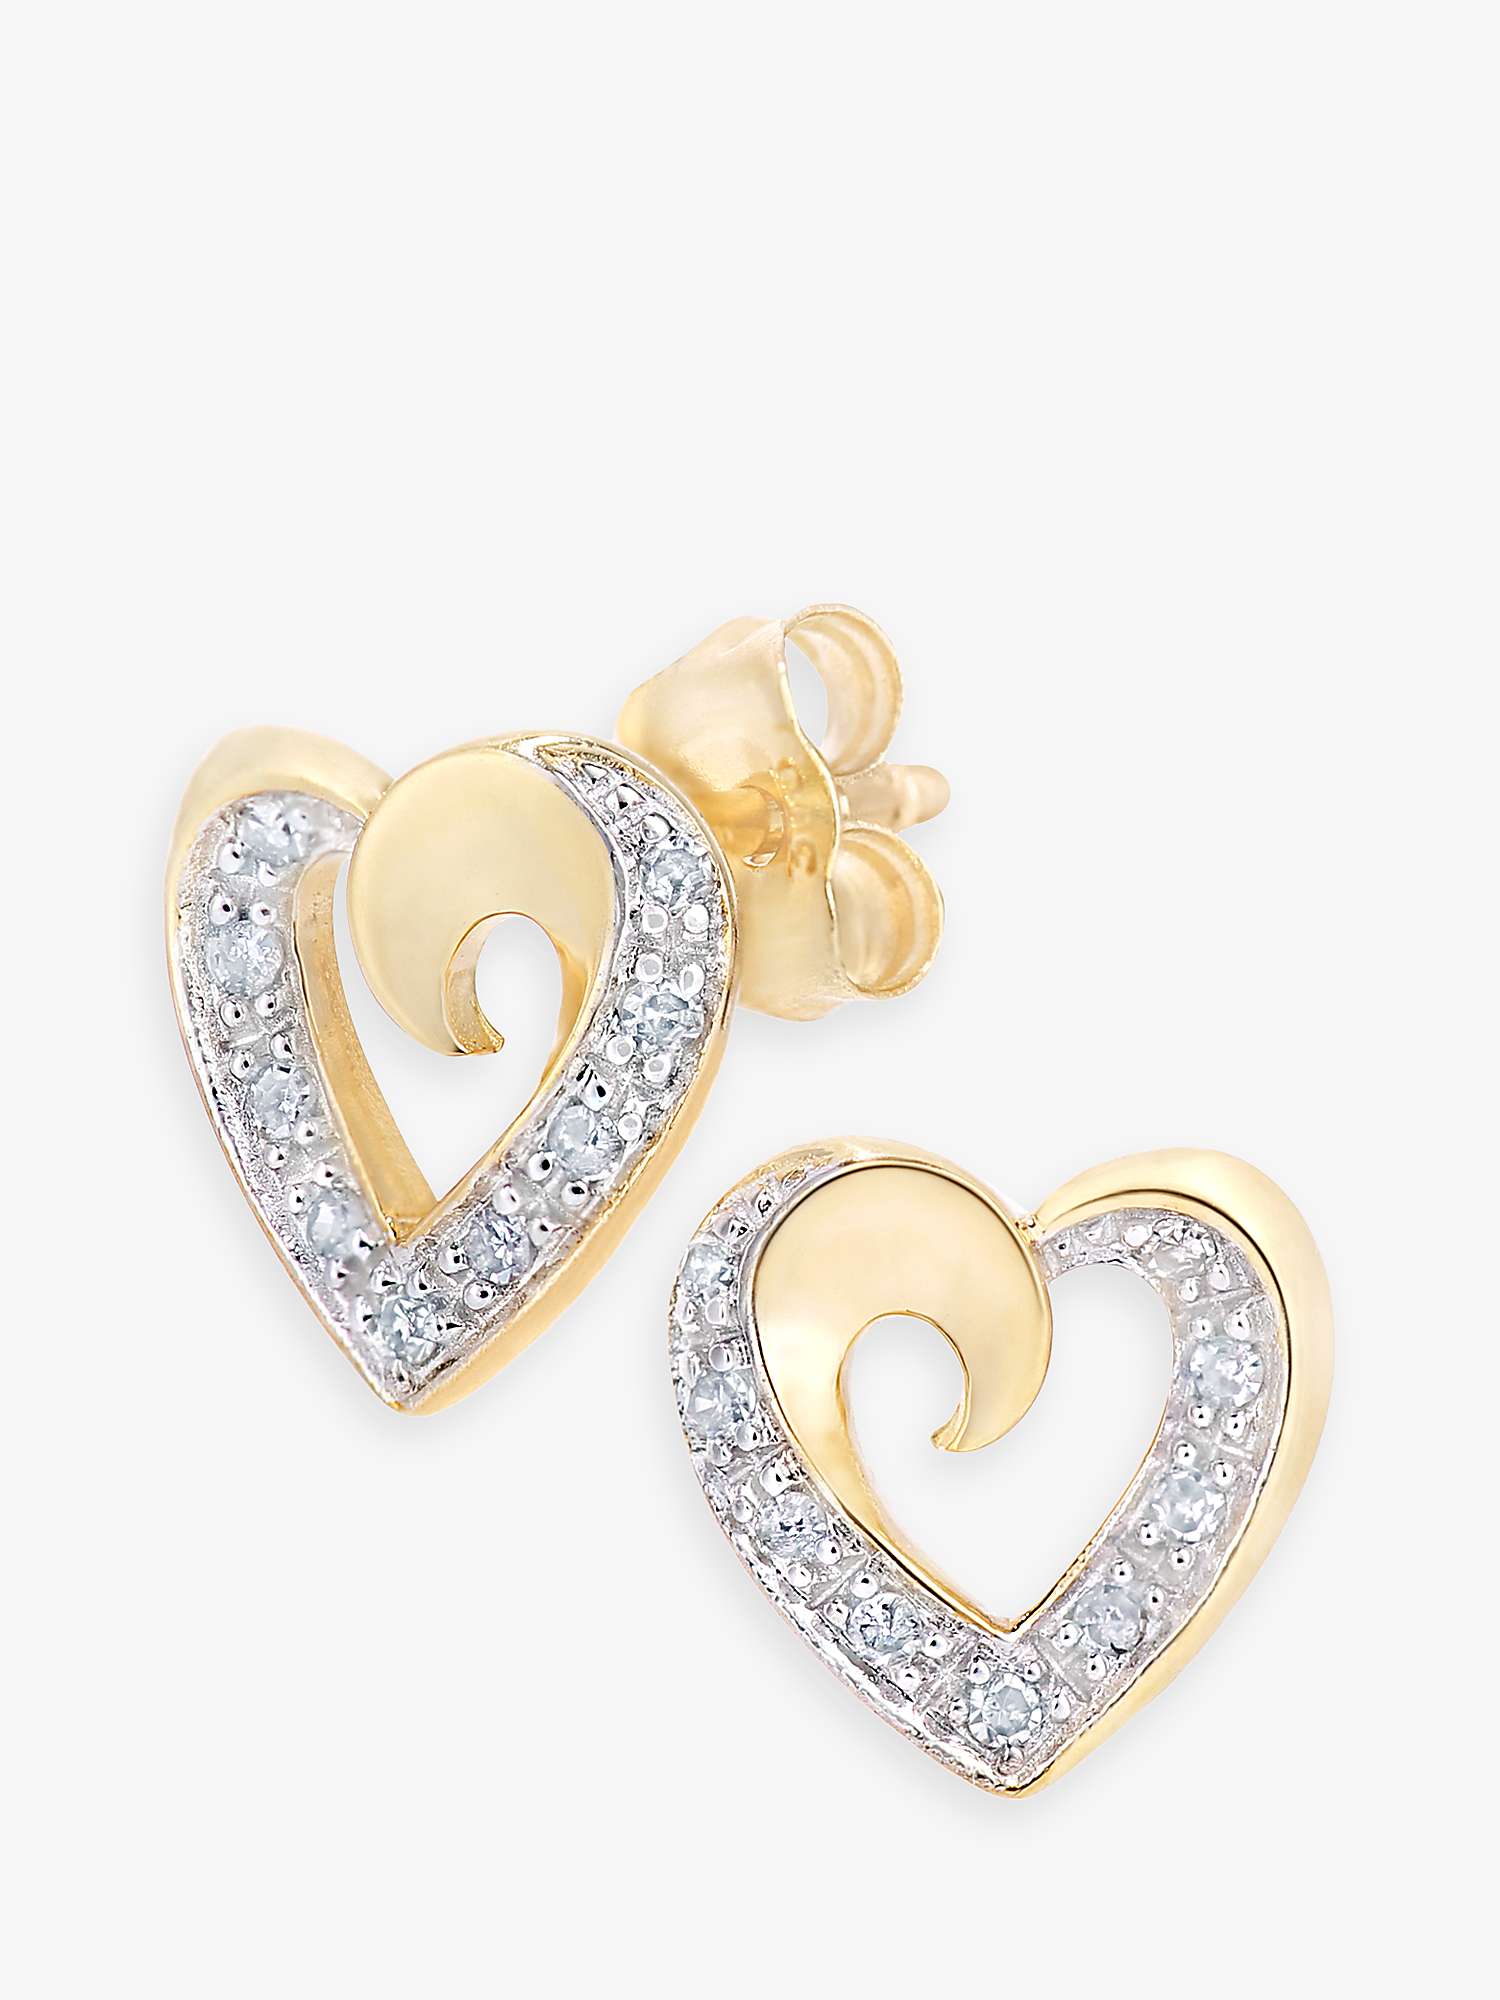 Buy Mogul 9ct Yellow Gold Diamond Heart Necklace and Earrings Jewellery Set, Gold Online at johnlewis.com